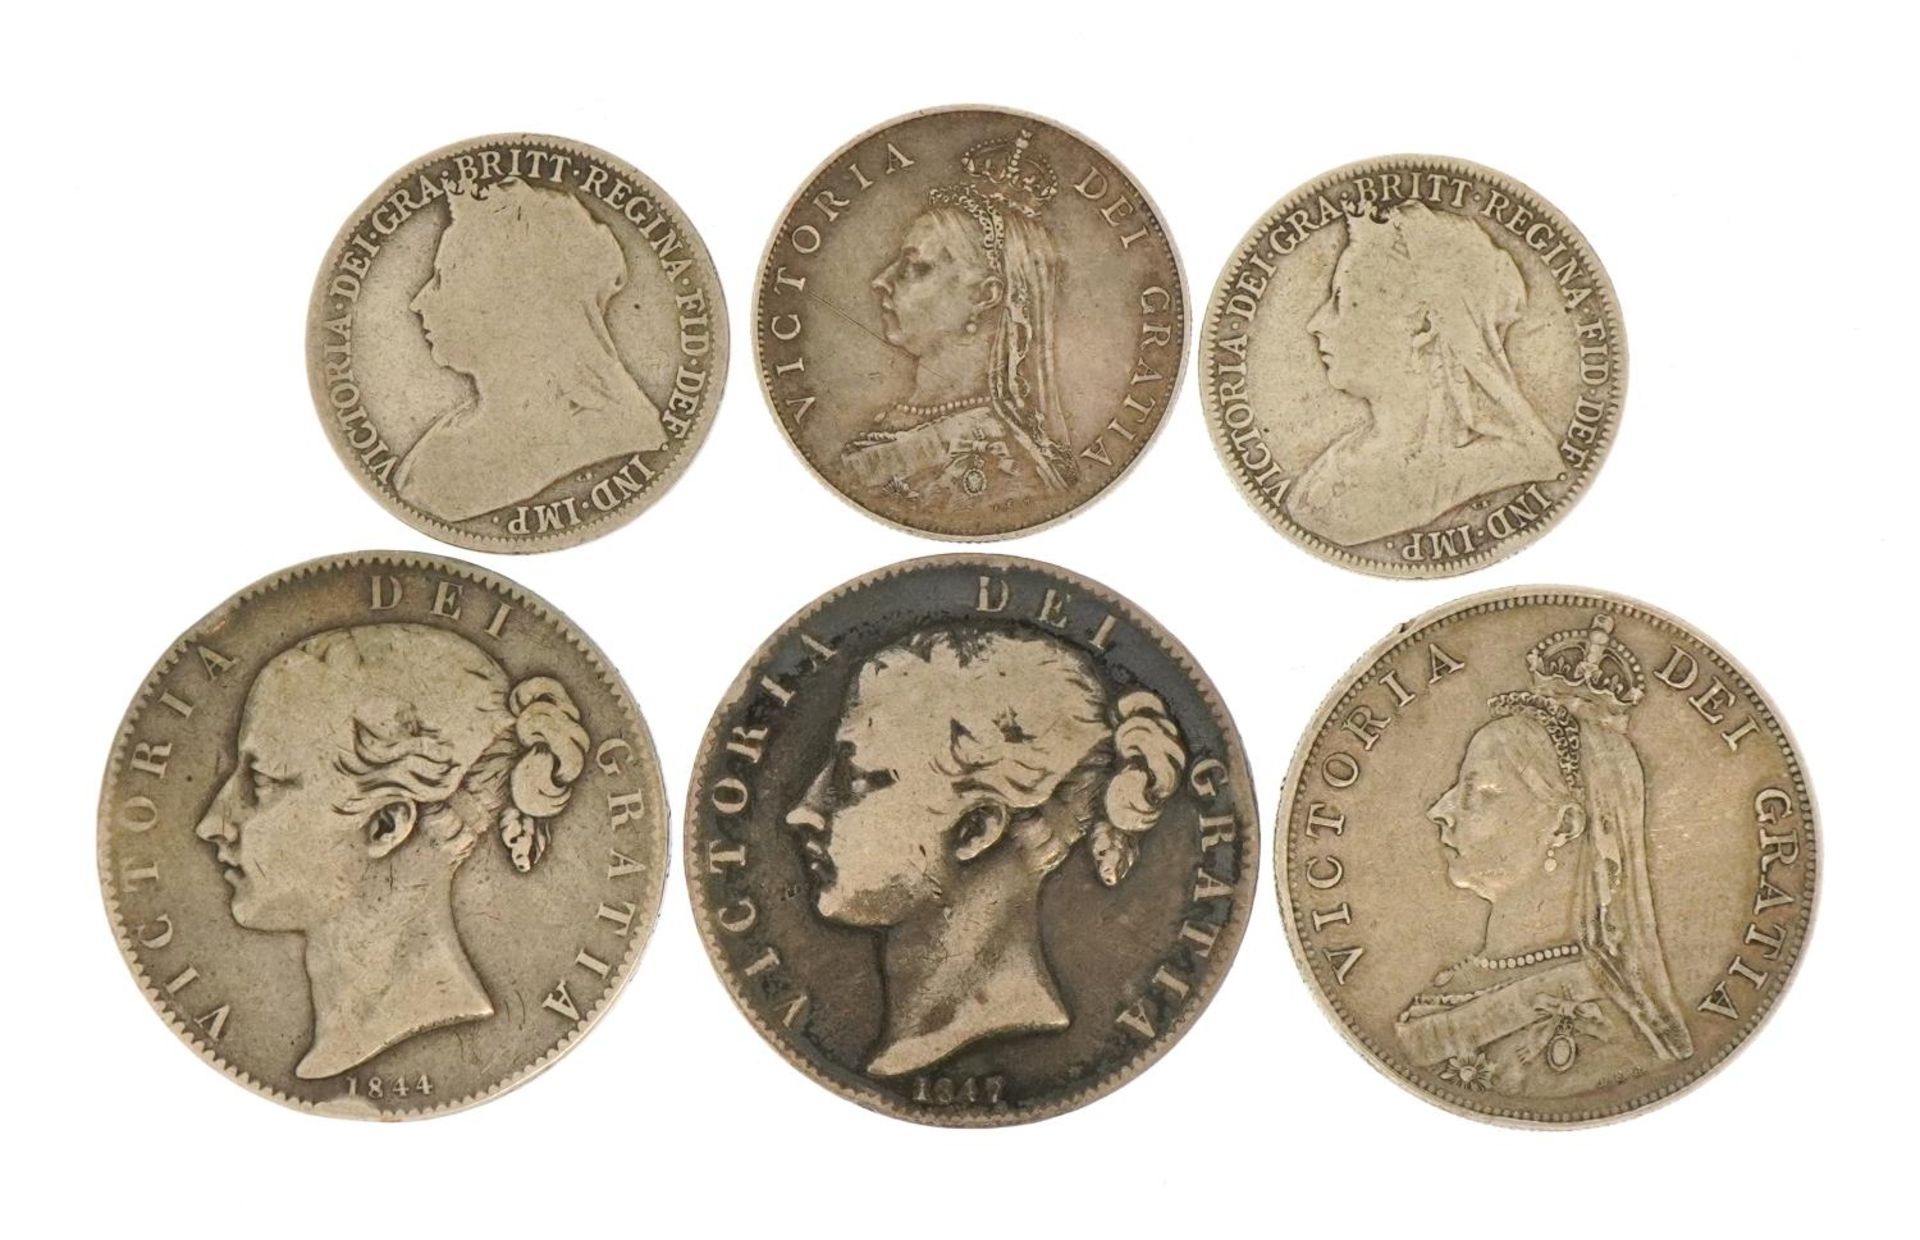 Victorian silver coinage including 1844 and 1847 crowns and an 1887 double florin, 110.0g